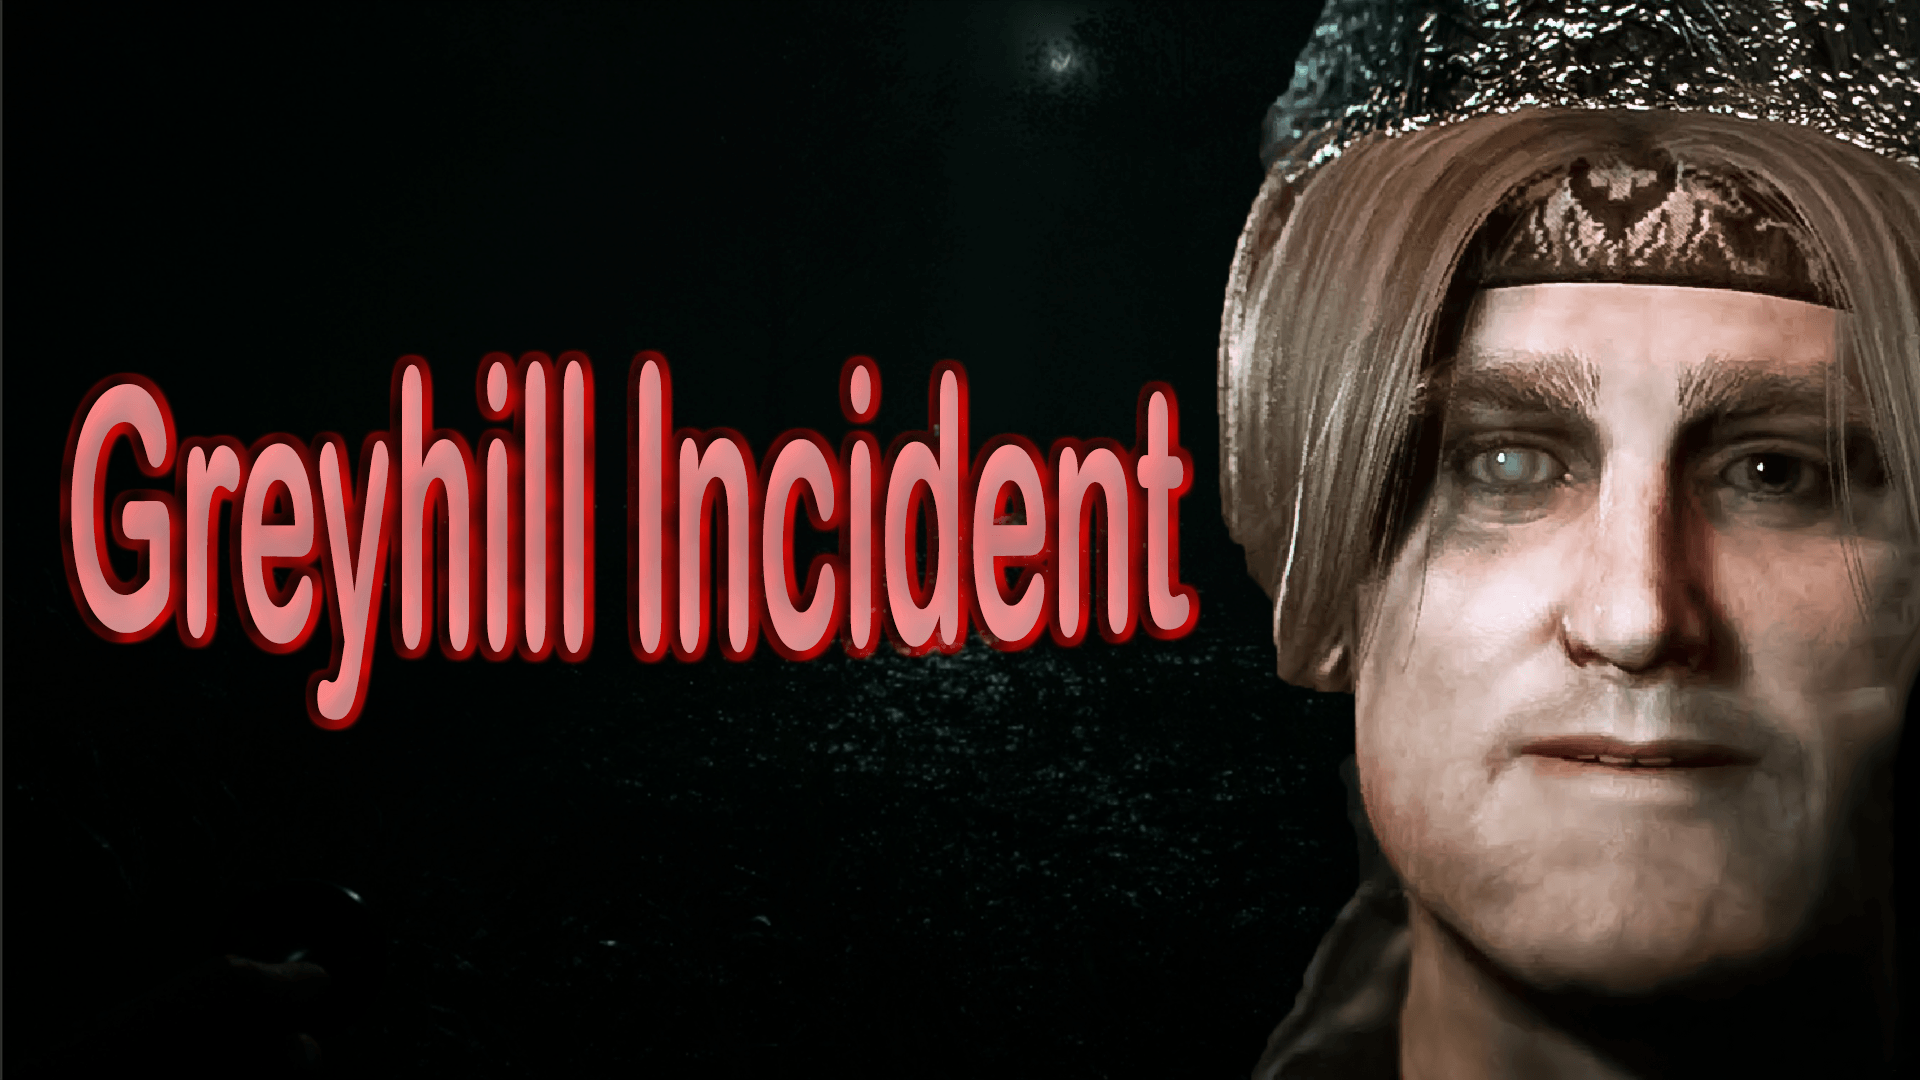 Greyhill incident. Greyhill incident [FITGIRL REPACK].